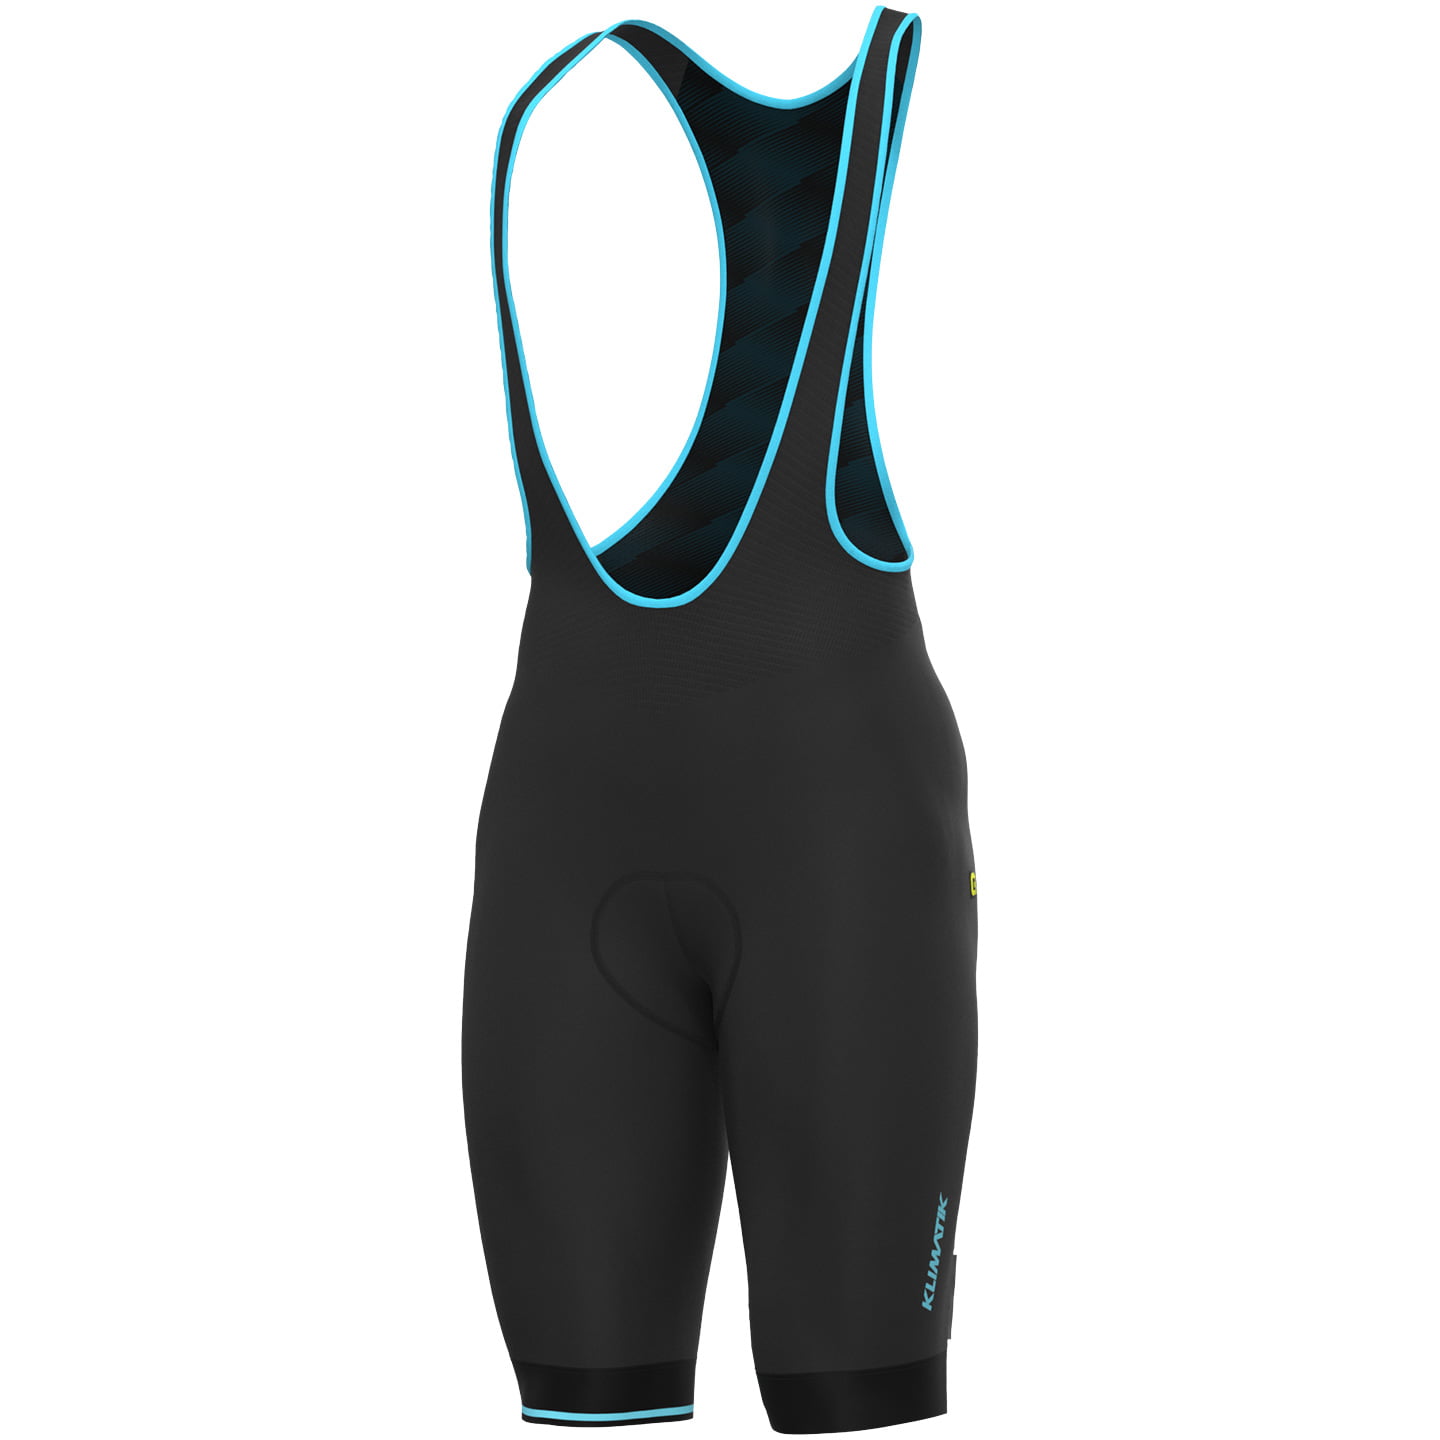 ALE K-Atmo 2.0 Thermal Bib Shorts, for men, size S, Cycle trousers, Cycle clothing